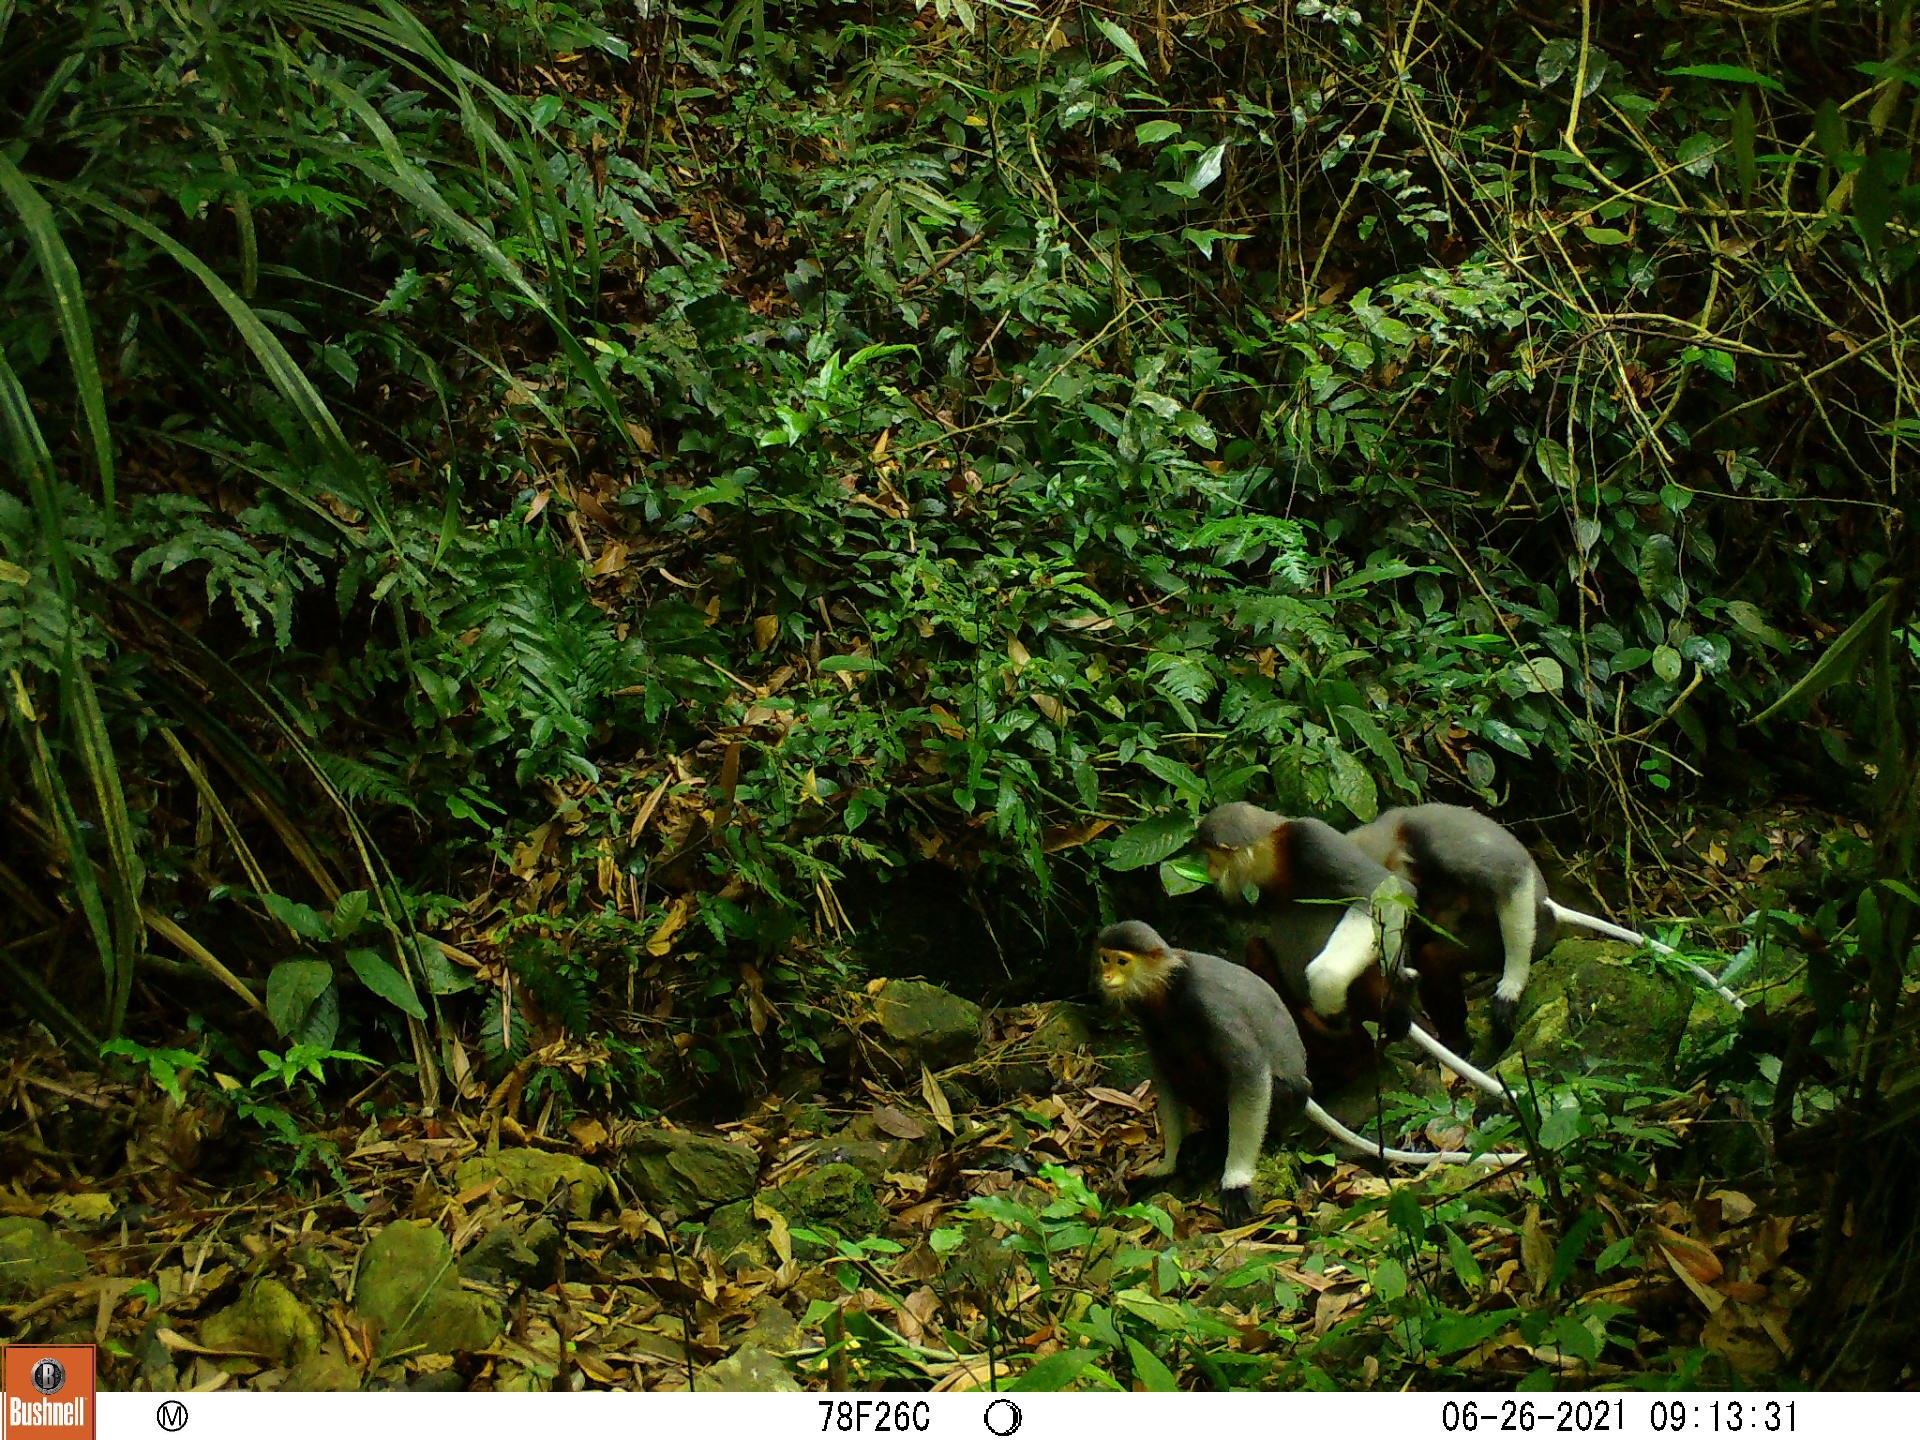 The red-shanked douc – an endangered species in Vietnam – was recorded in 2017.